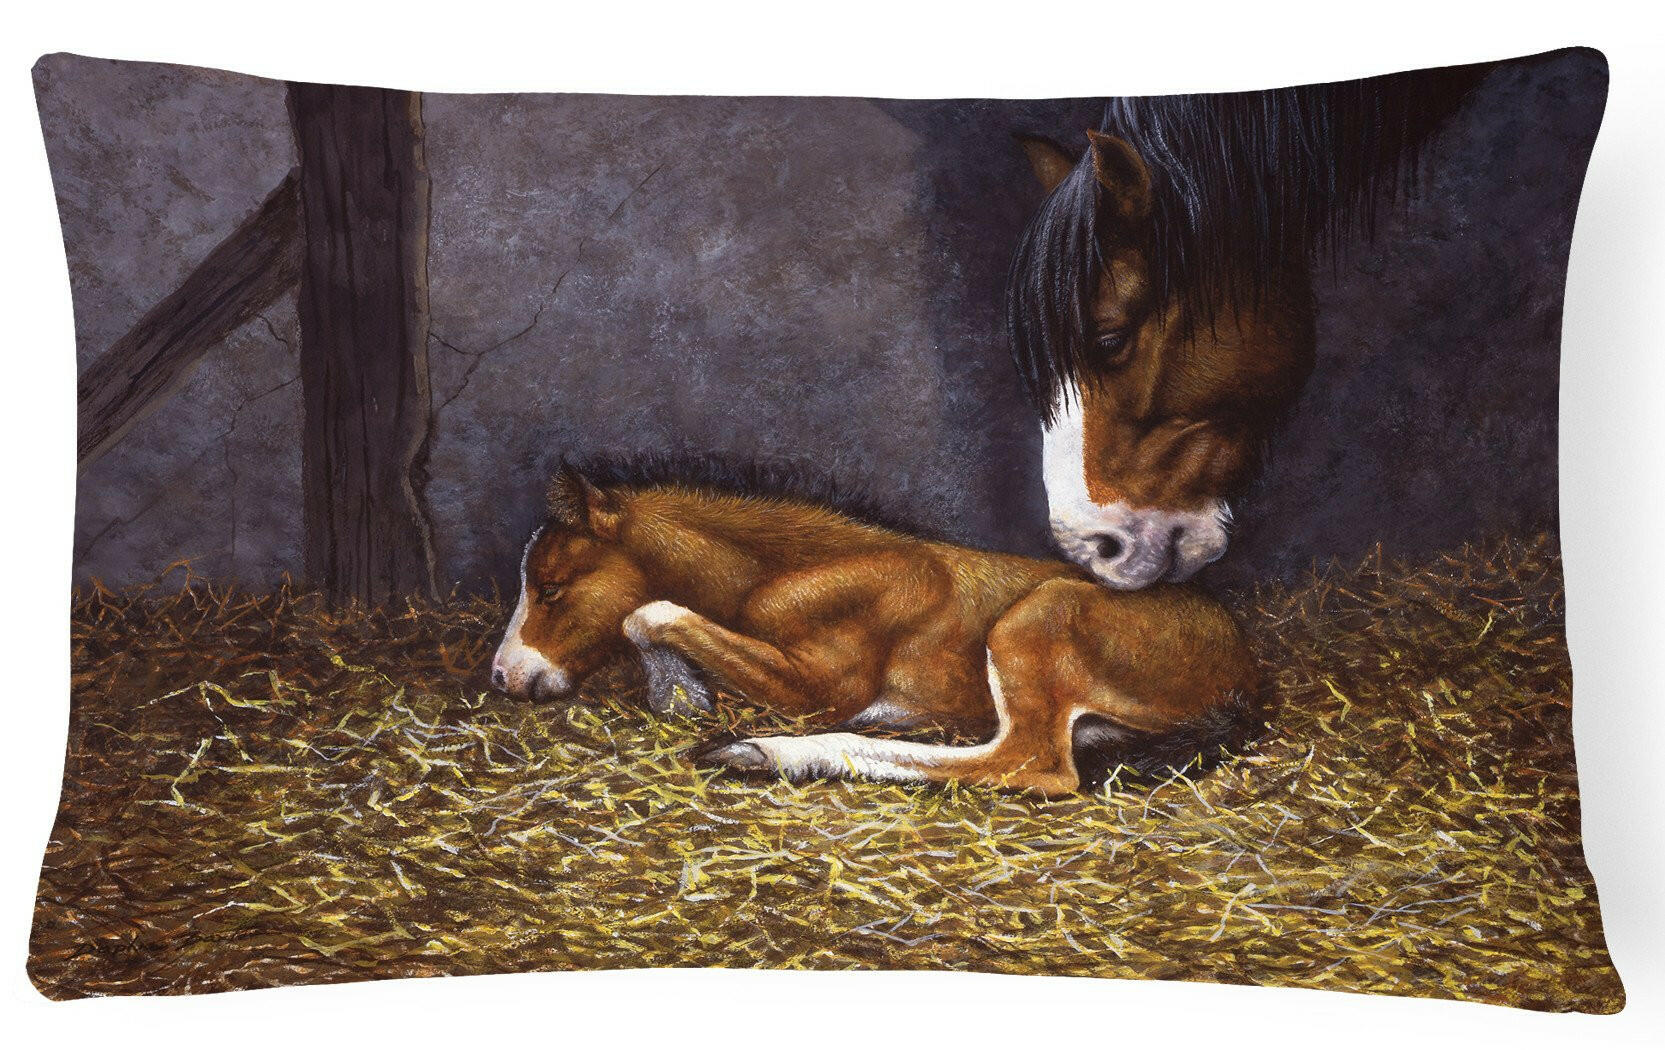 Horse and Her Foal Fabric Decorative Pillow BDBA0207PW1216 by Caroline's Treasures